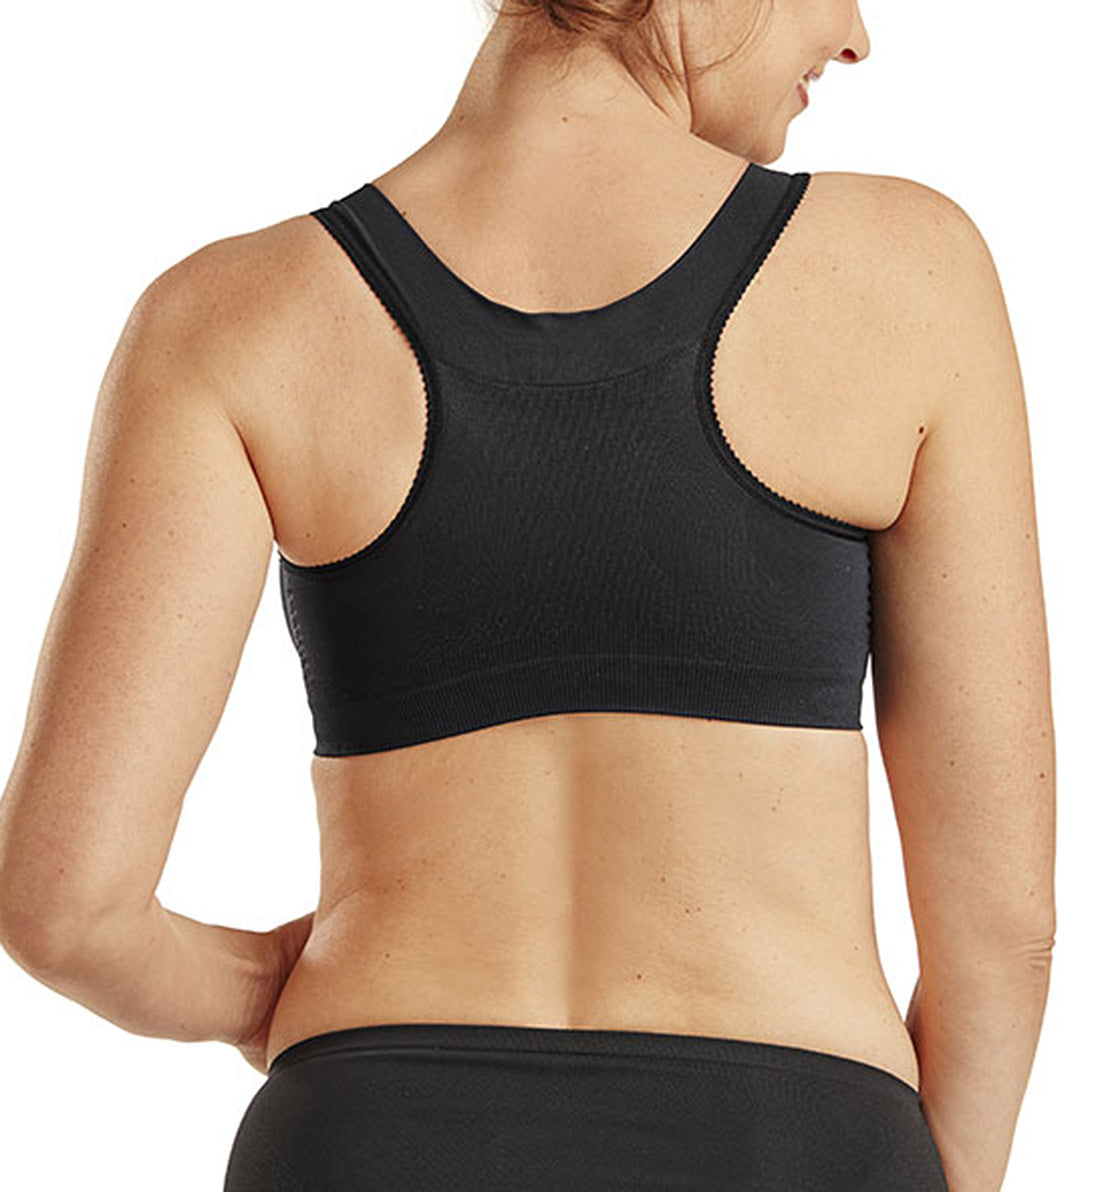 Carefix  Get Free Shipping on the Best Post-Op Bras at Breakout Bras